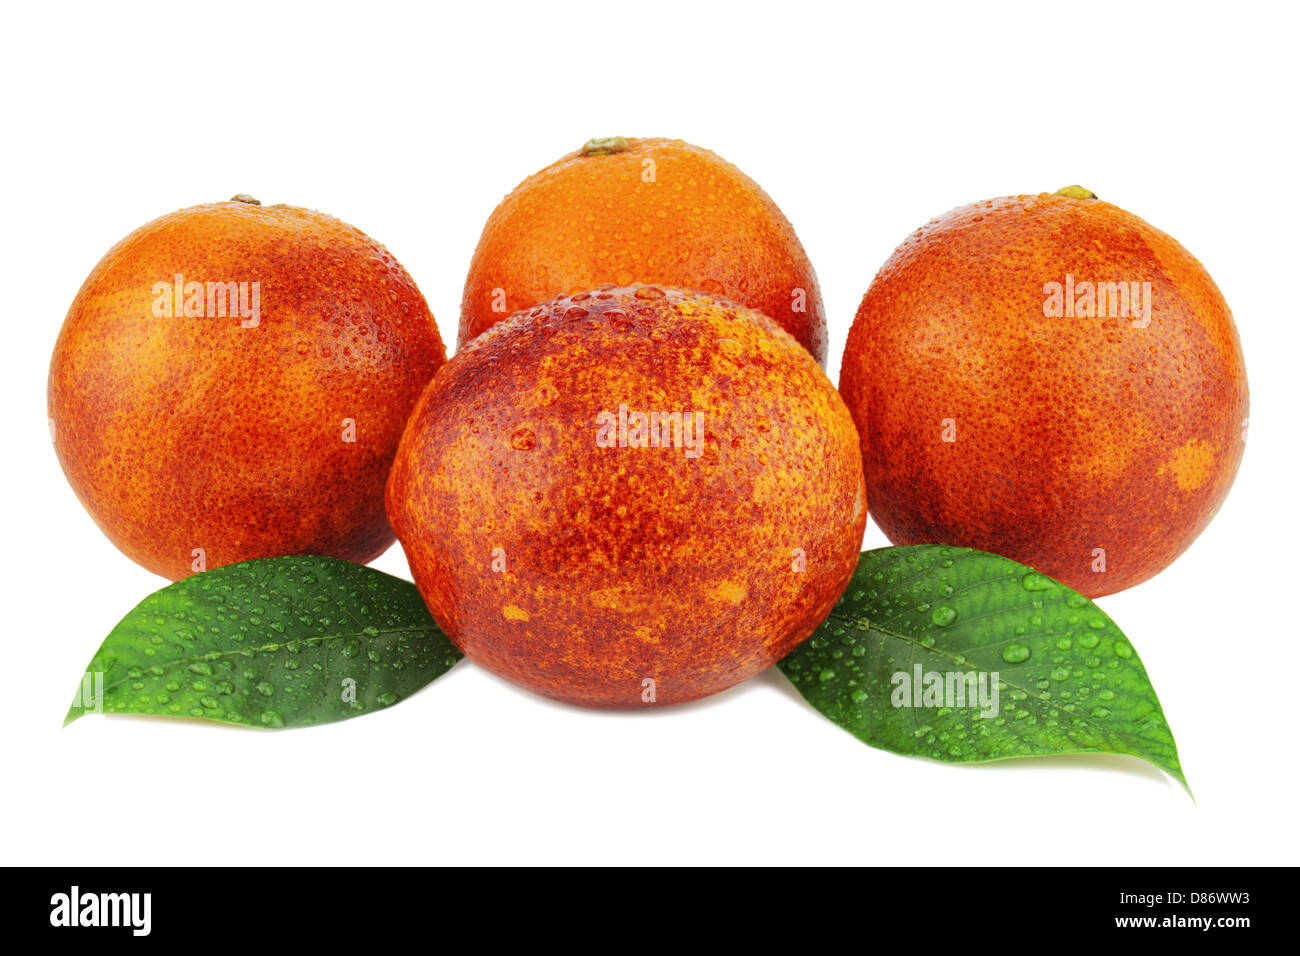 Ripe red blood oranges with green leaves isolated on white background. Stock Photo